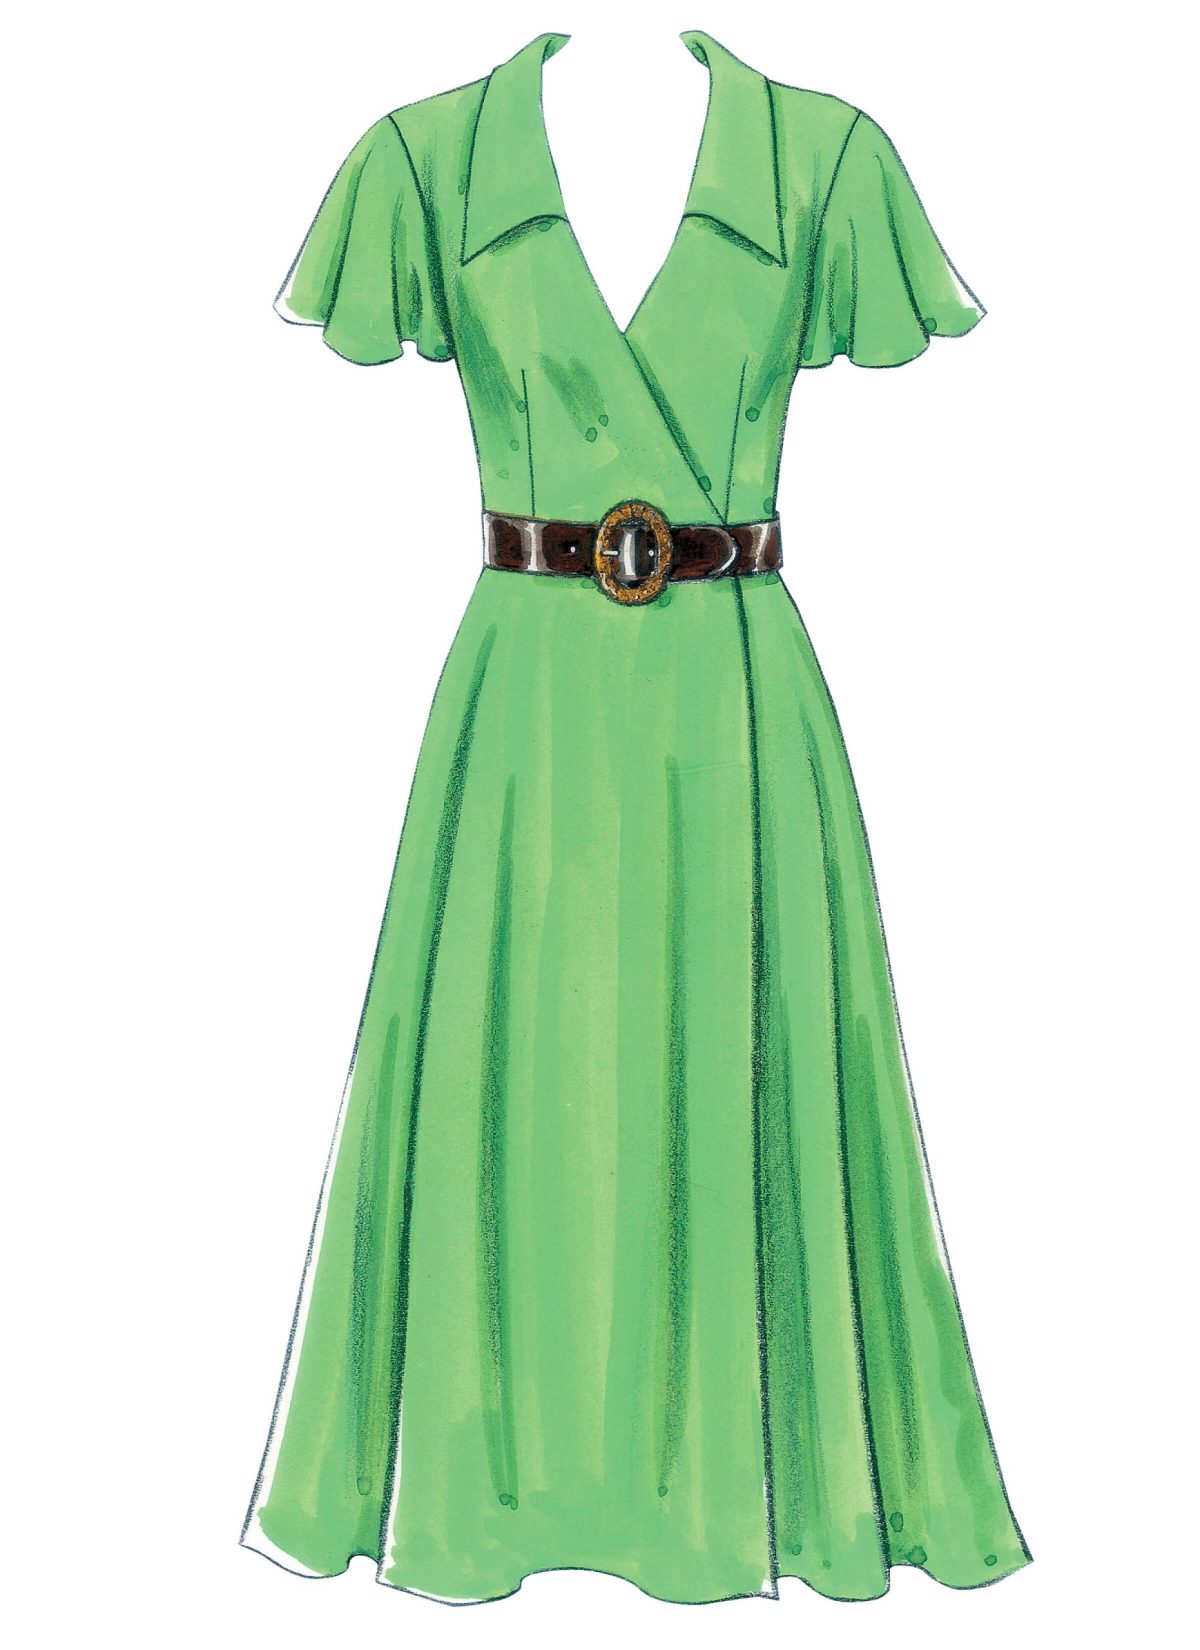 Butterick Sewing Pattern B5030 Misses' Dress, Belt and Sash